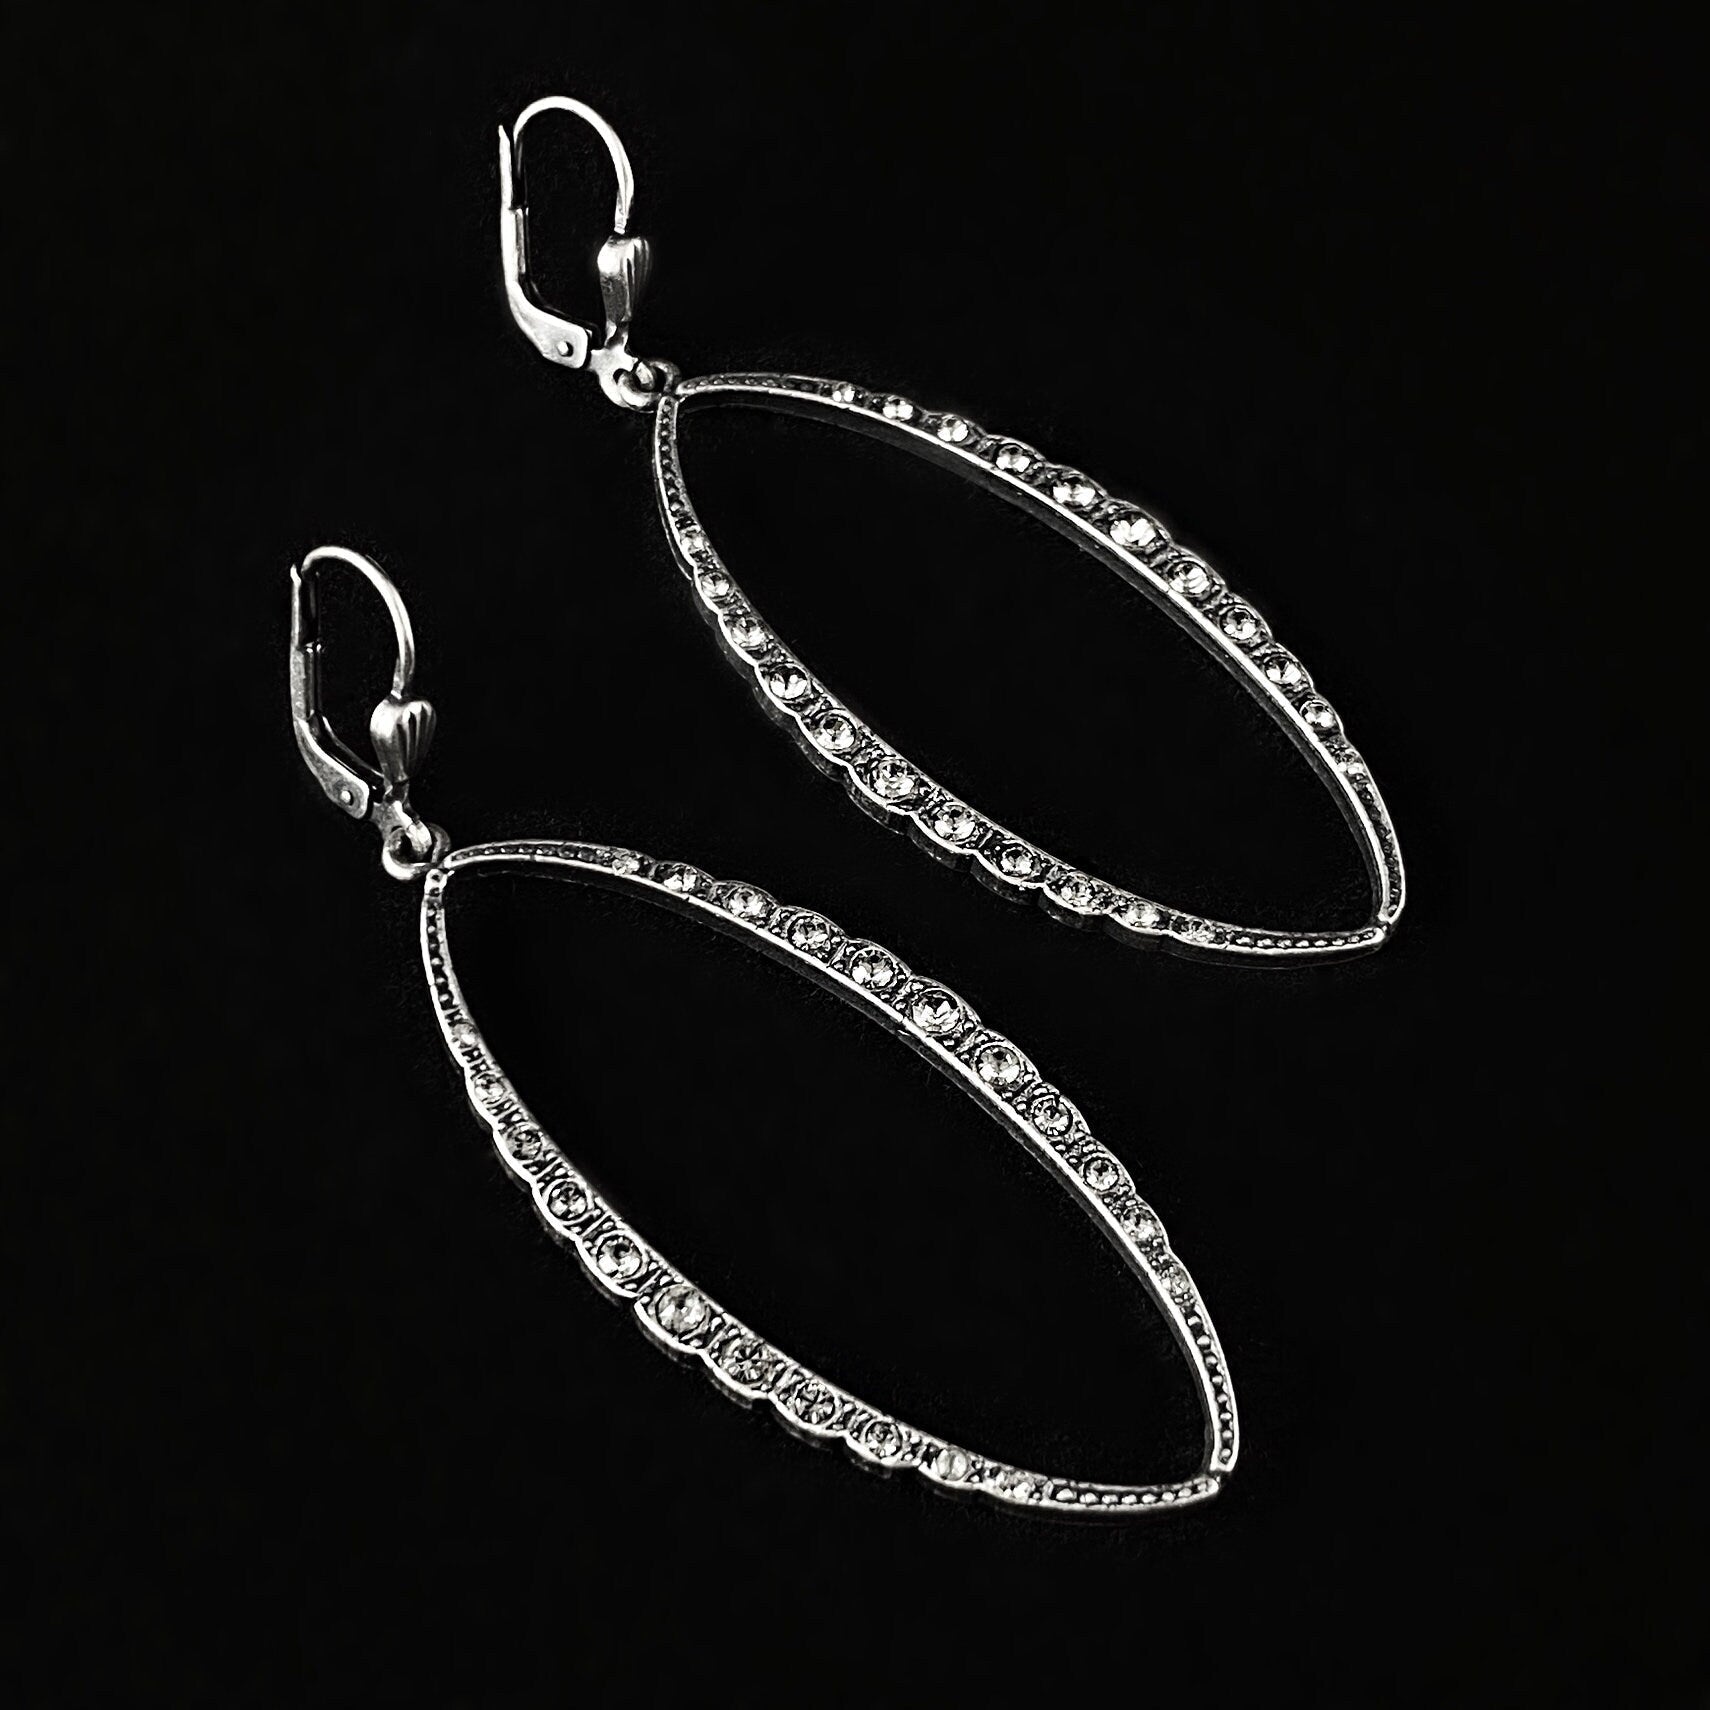 Oval Silver Drop Earrings with Clear Swarovski Crystals - La Vie Parisienne by Catherine Popesco